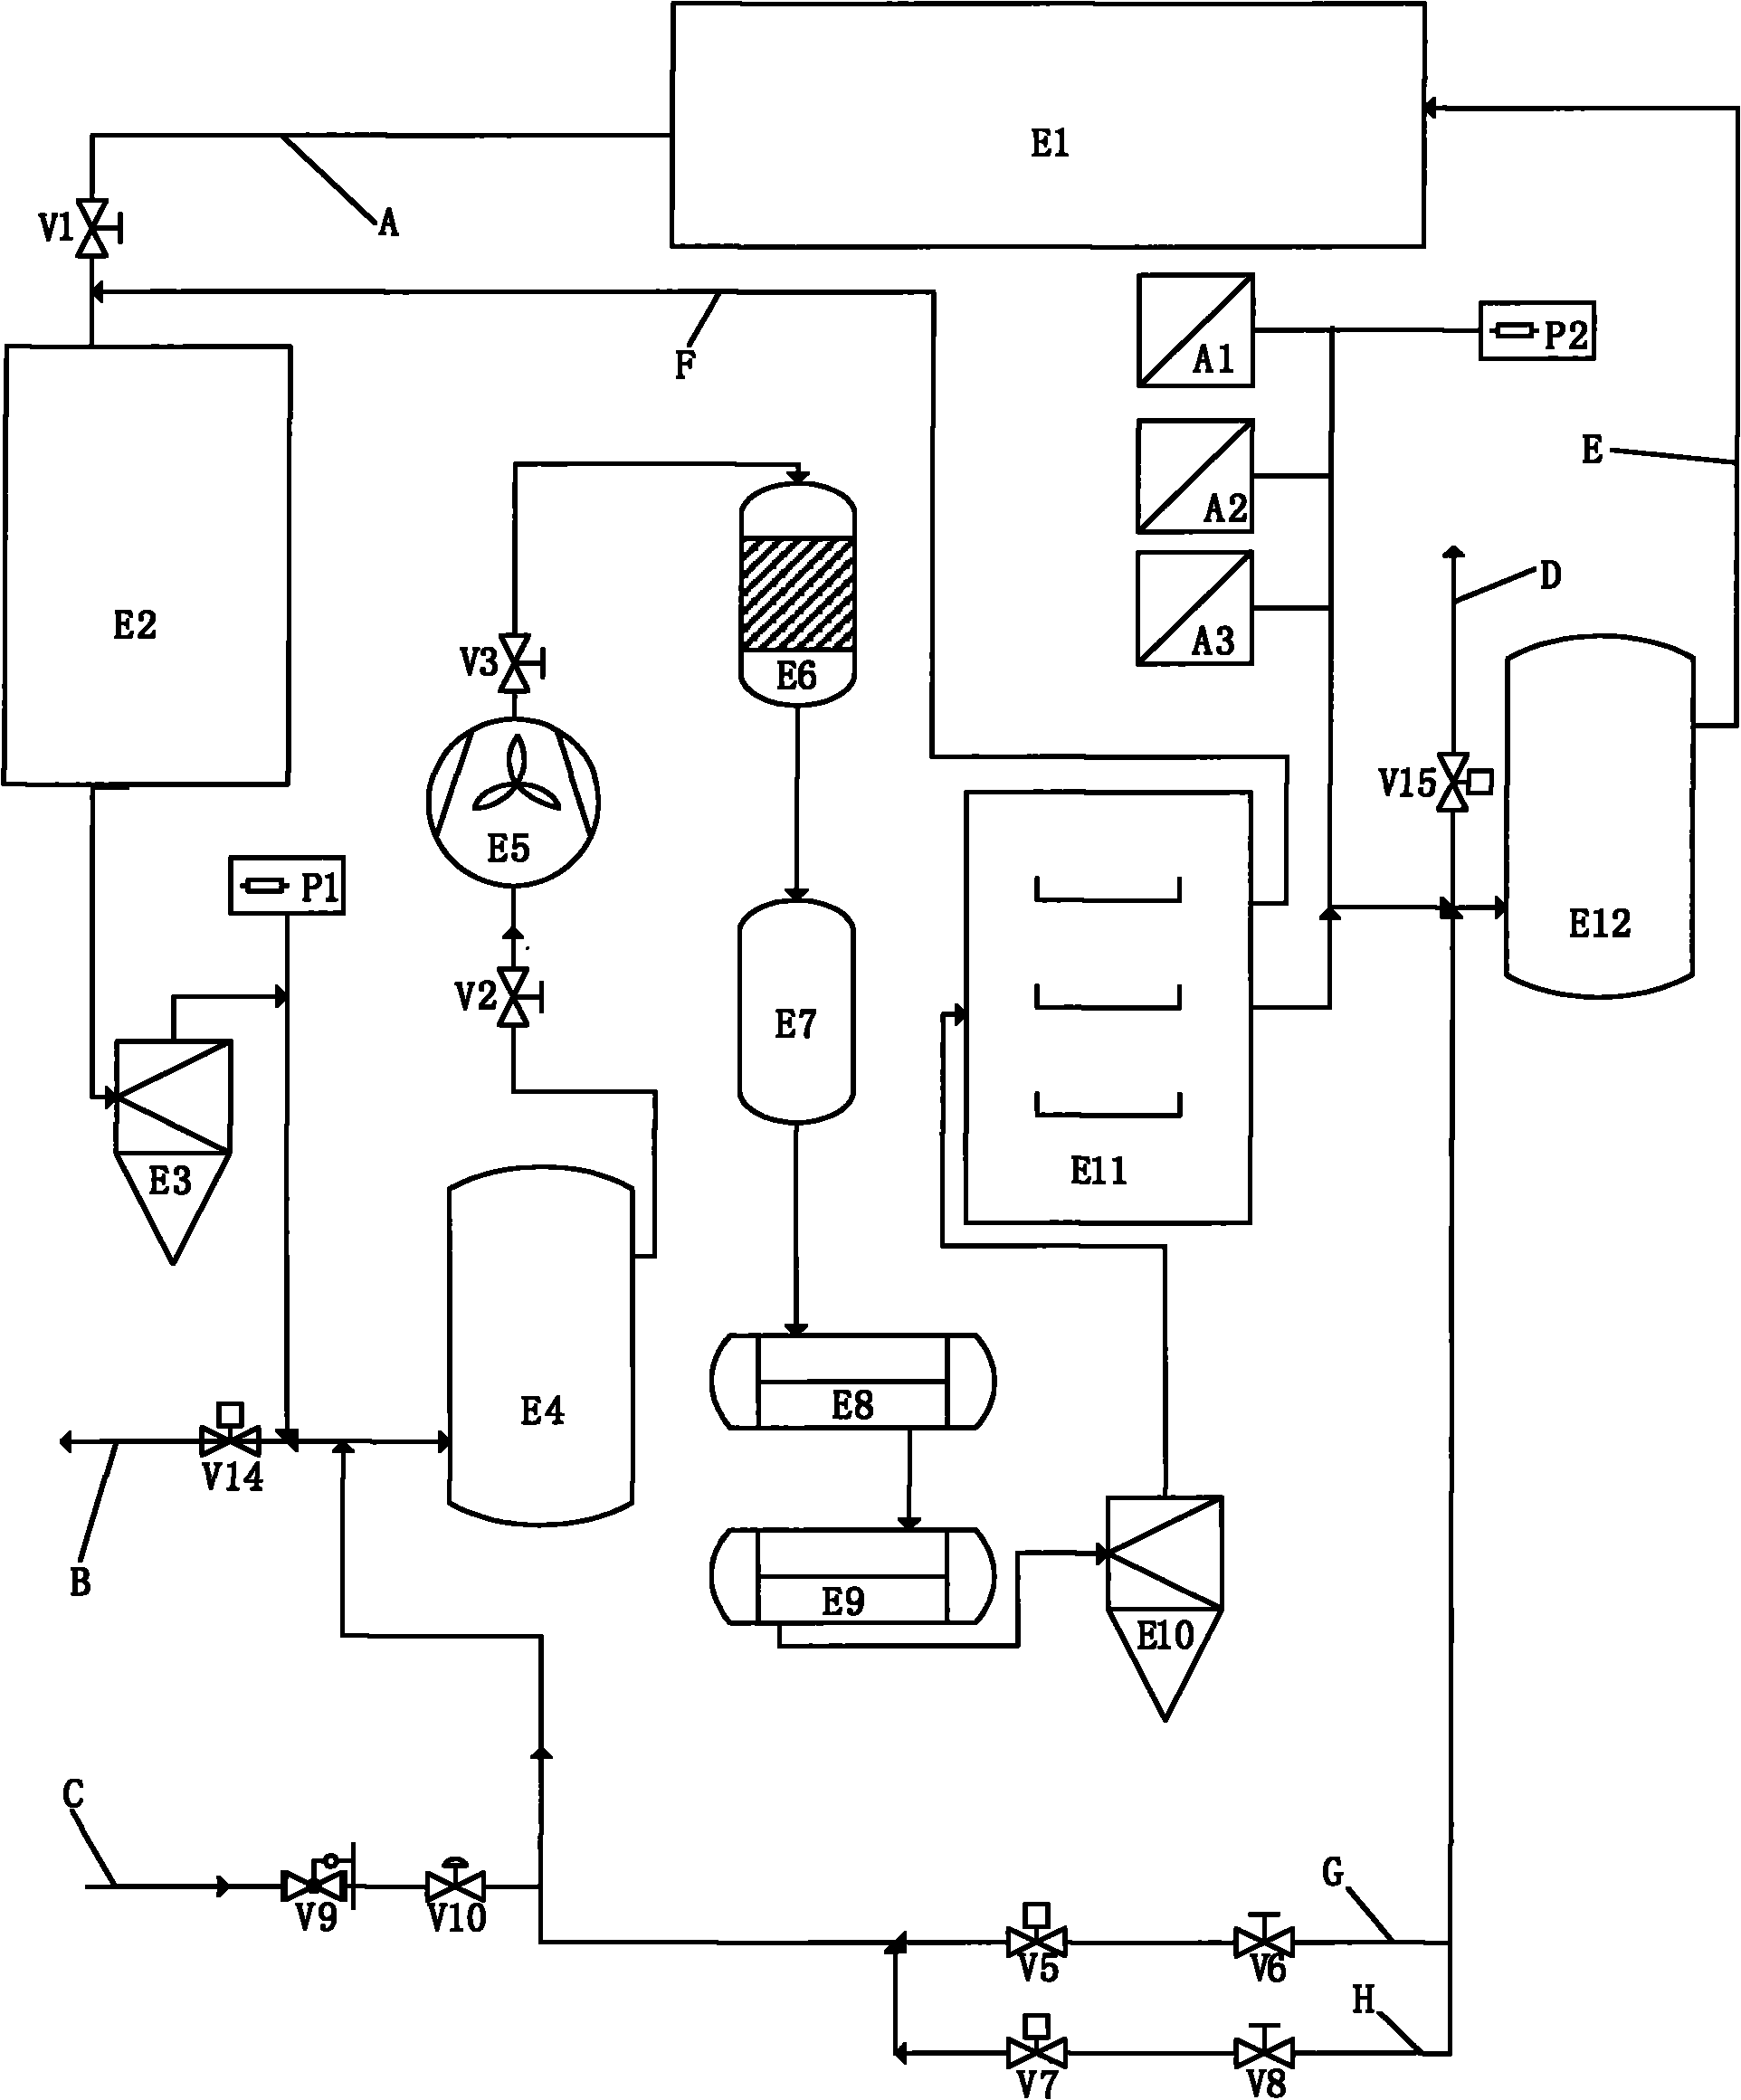 Process and device for recovering and recycling protective gas of bell-type bright annealing furnace